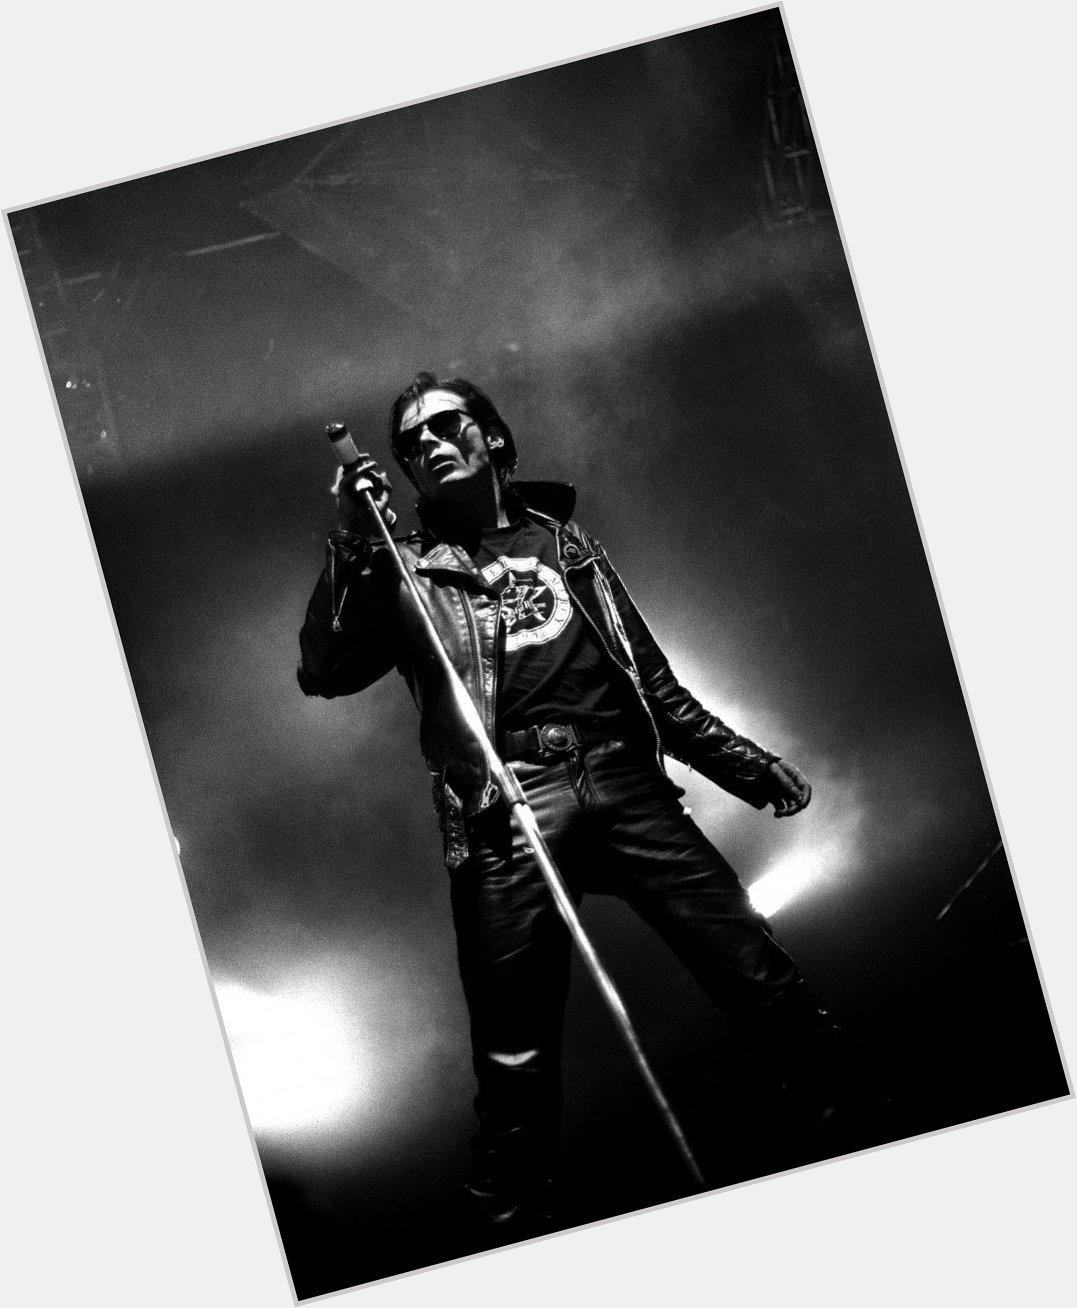 Happy 58th birthday to Andrew Eldritch, my favorite asshole musician 